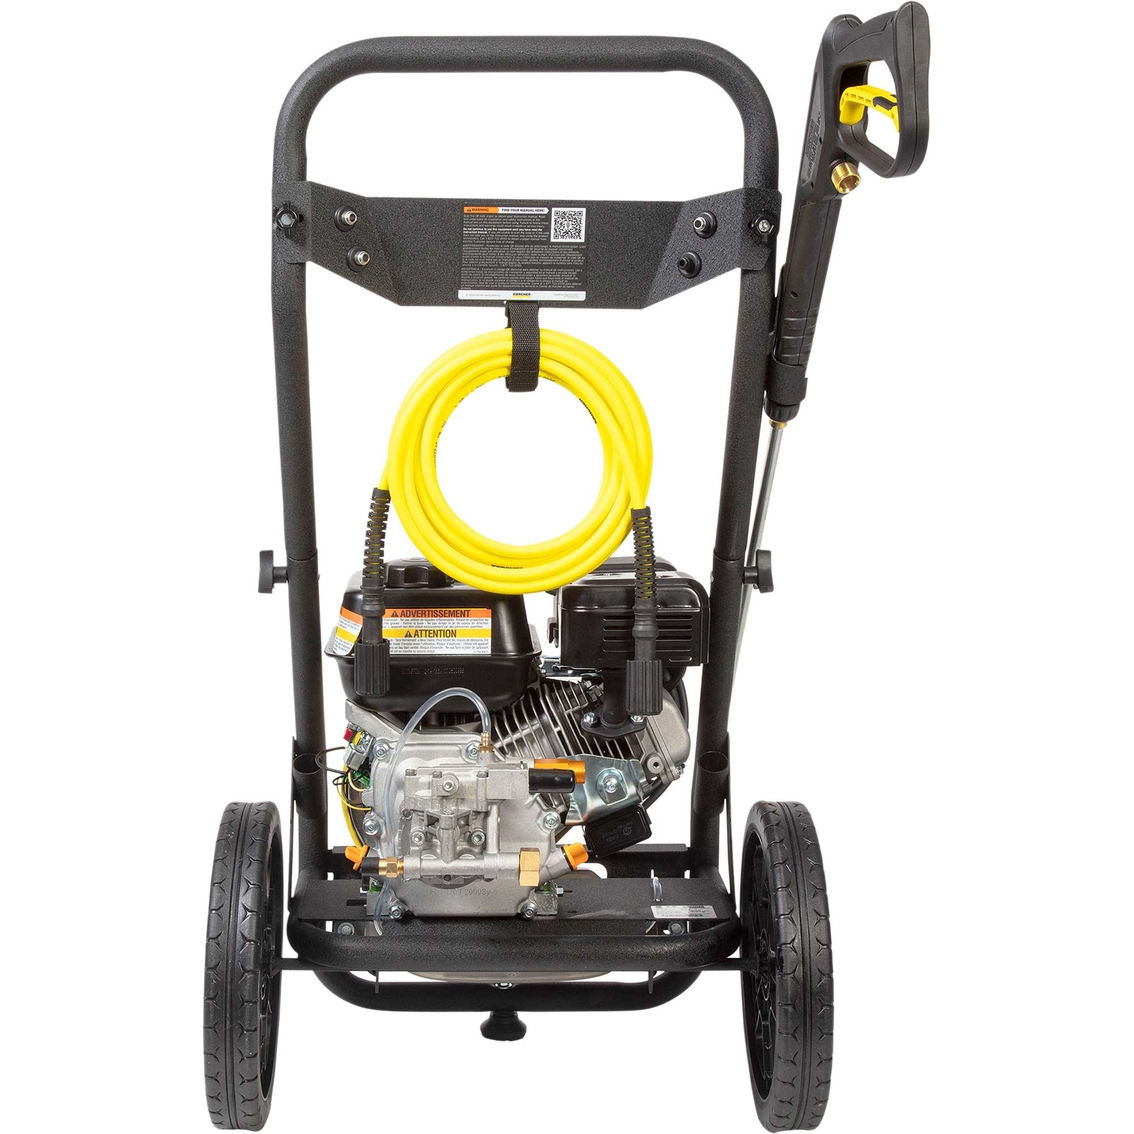 Karcher G 3200 Q 3200 PSI 2.6 GPM Axial Pump Gas Pressure Washer with 4 Nozzles - Image 2 of 7